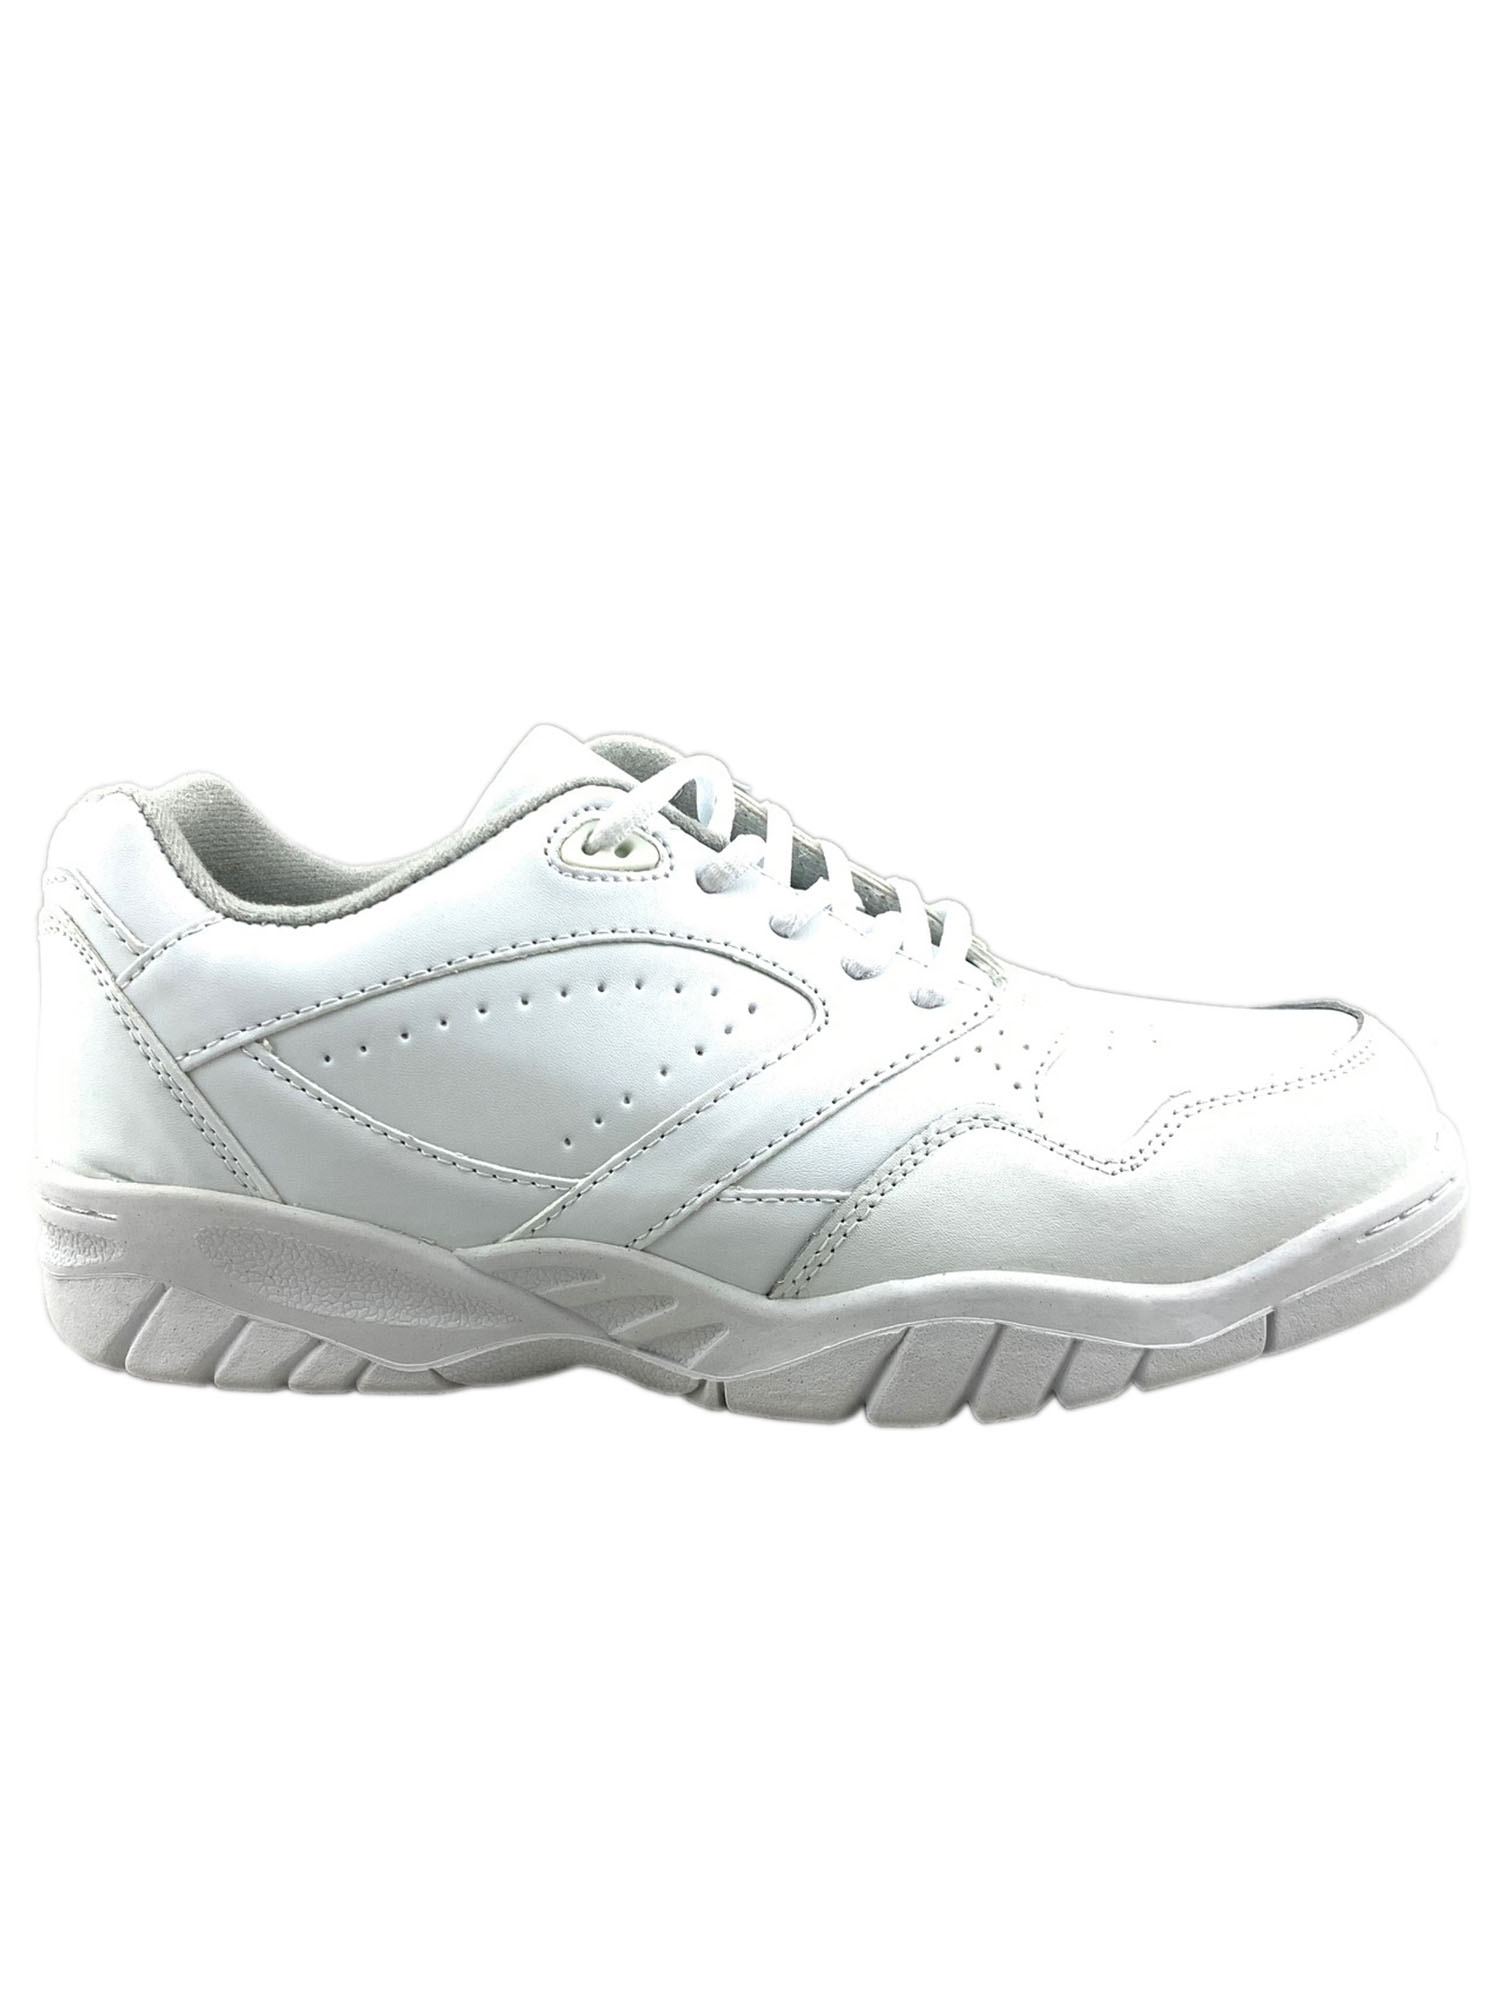 Tanleewa Men's Leather White Sports Shoes Lightweight Sneakers Breathable Casual Shoe Size 8 - image 1 of 5